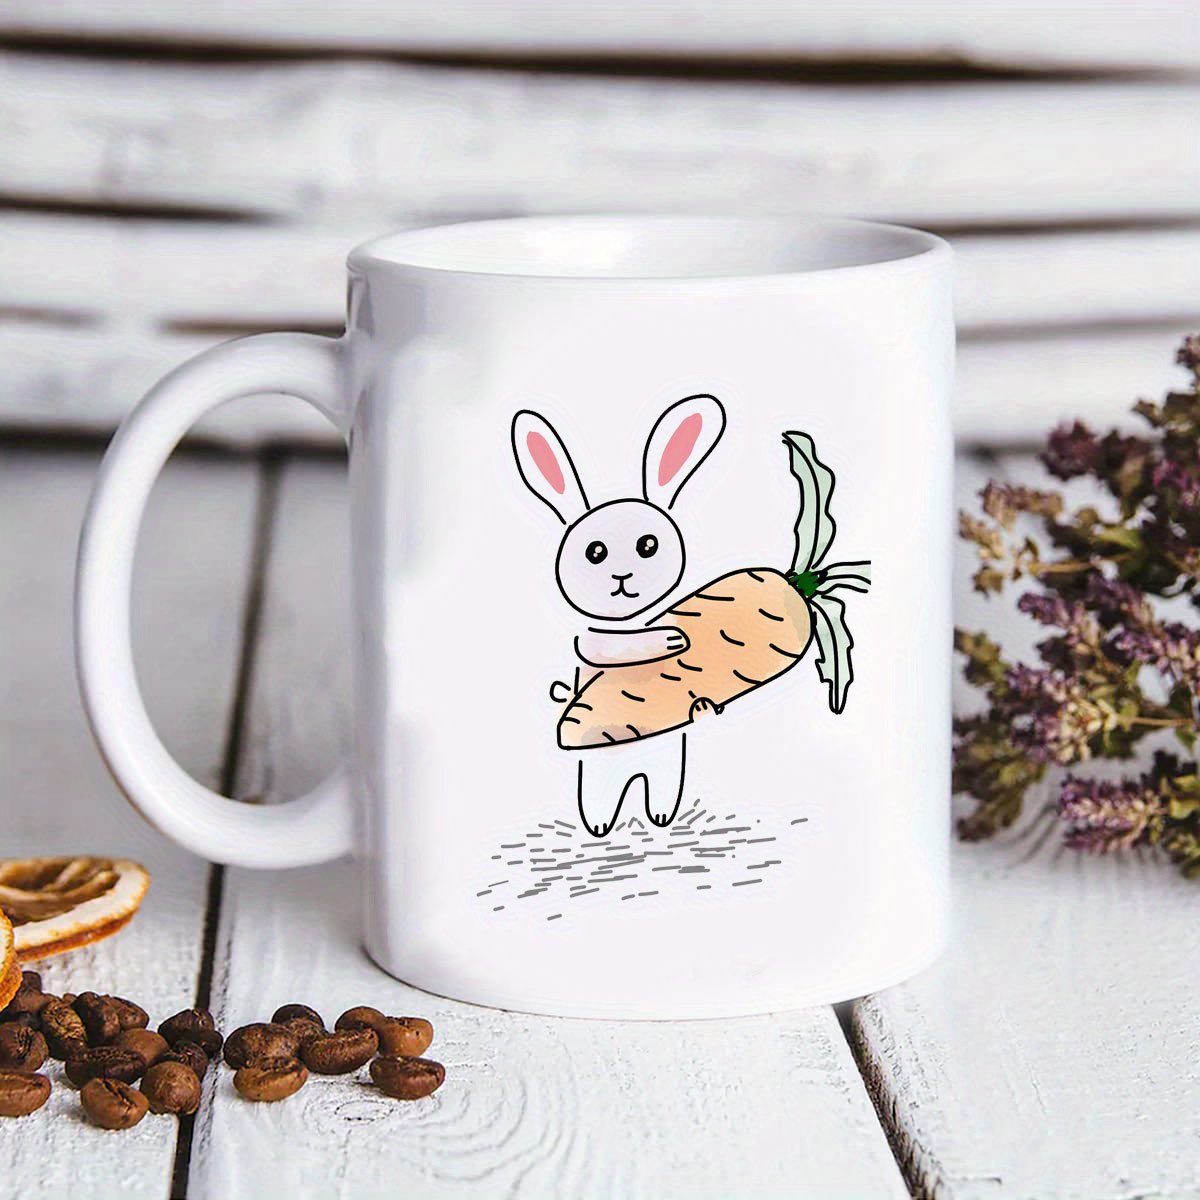 easter mug easter egg bunny coffee mug colorful holiday ceramic tea mug cup for easter spring party home school office table centerpieces gift 11oz